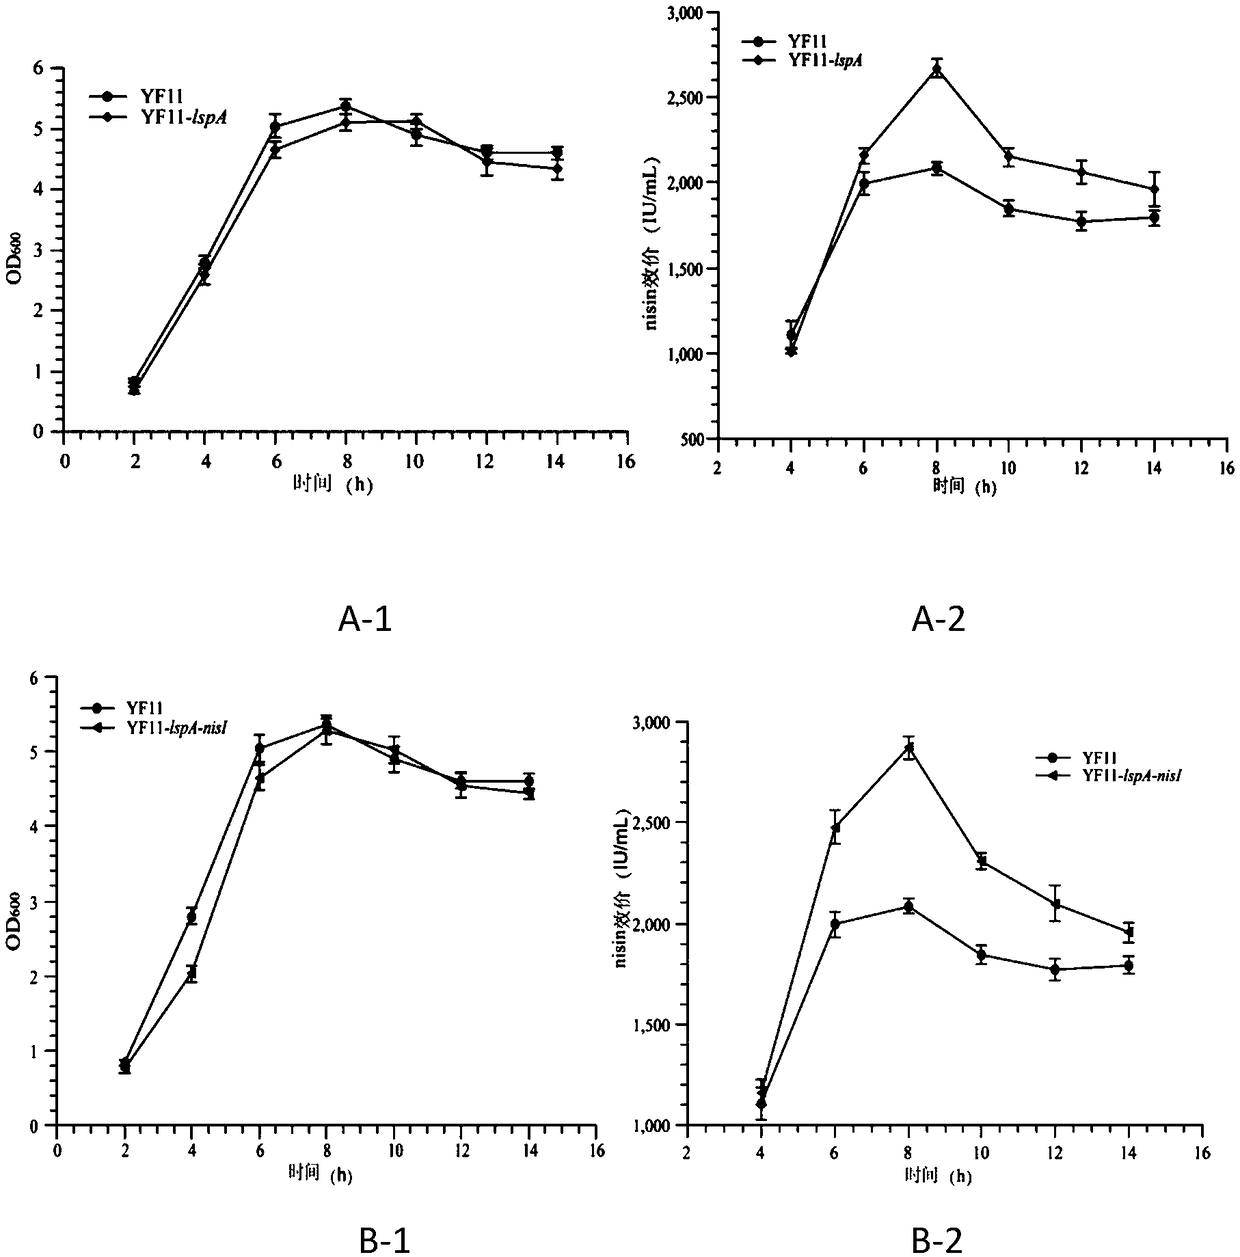 Recombinant lactococcus lactis yielding nisin highly and construction method